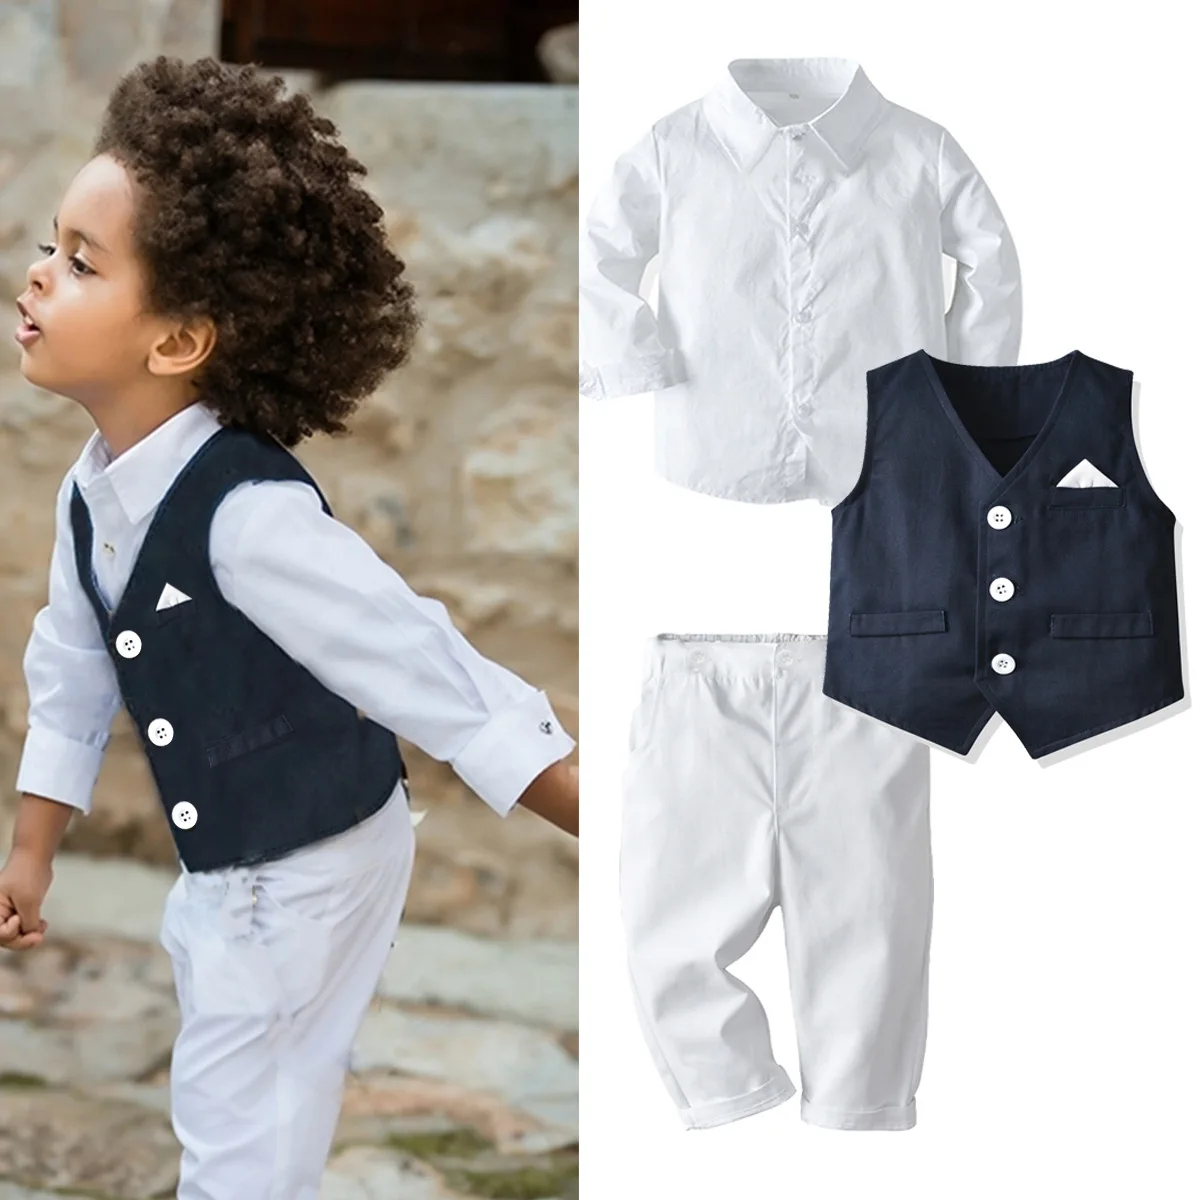 YALLET Toddler Baby Boy Clothes Suit Gentleman India | Ubuy